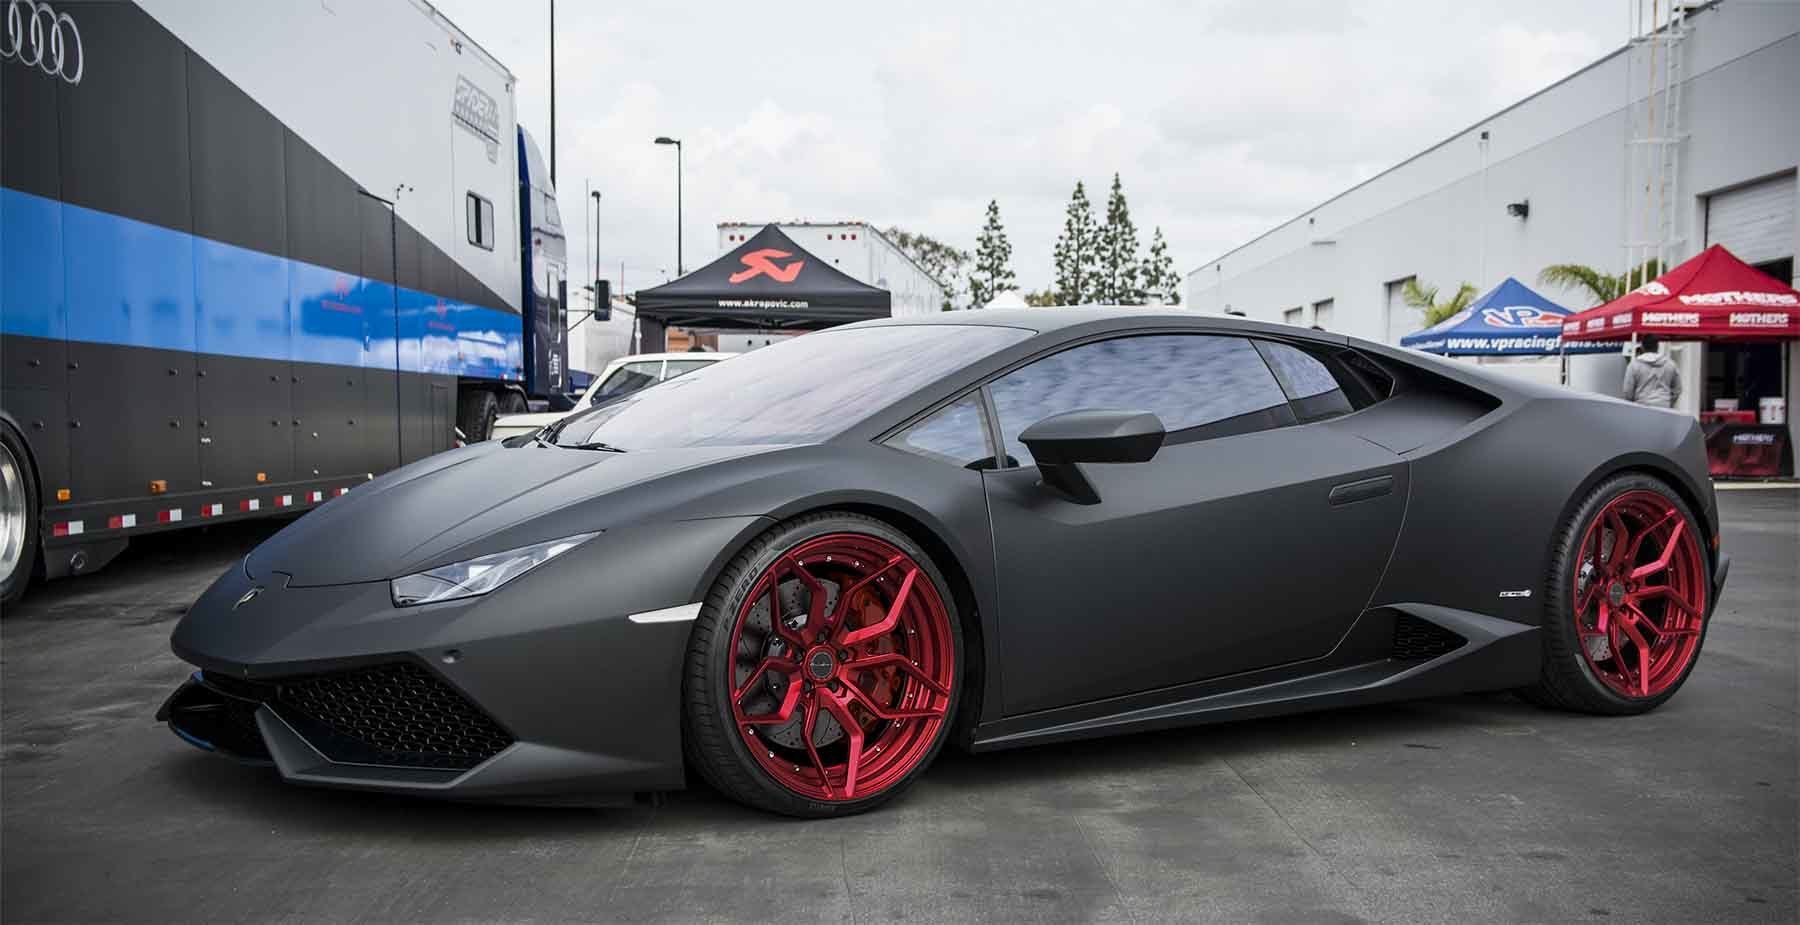 images-products-1-1858-232974146-matte-black-huracan-brixton-forged-pf9-carbon-red-matte.jpg